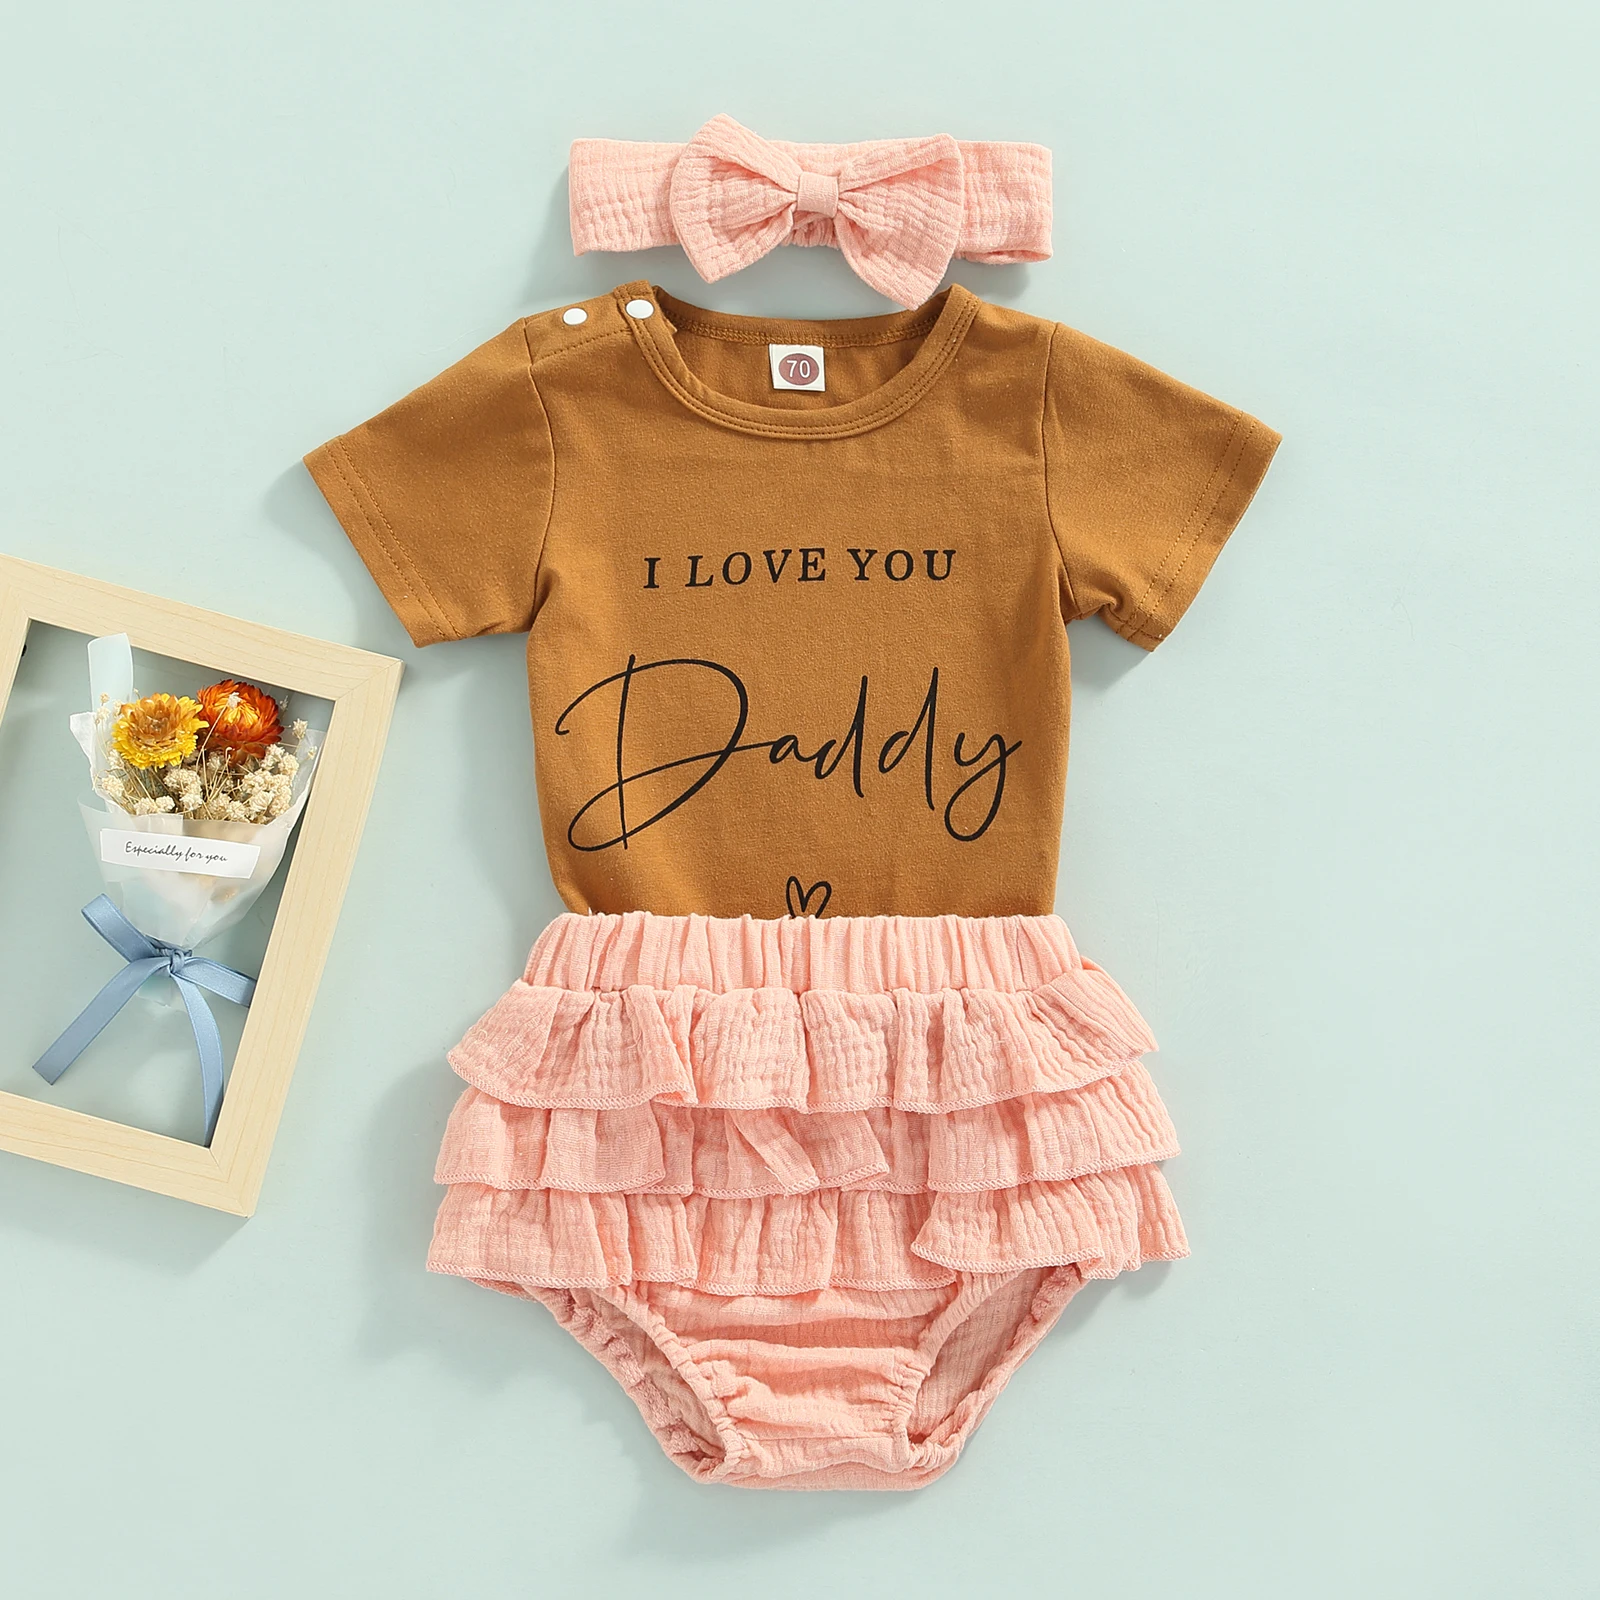 2022 0-18M Baby Girl Clothing I LOVE YOU DADDY Letter Print Short Sleeve T-shirt+Layered Ruffle Shorts Skirt+Bow Headband 3pcs baby's complete set of clothing